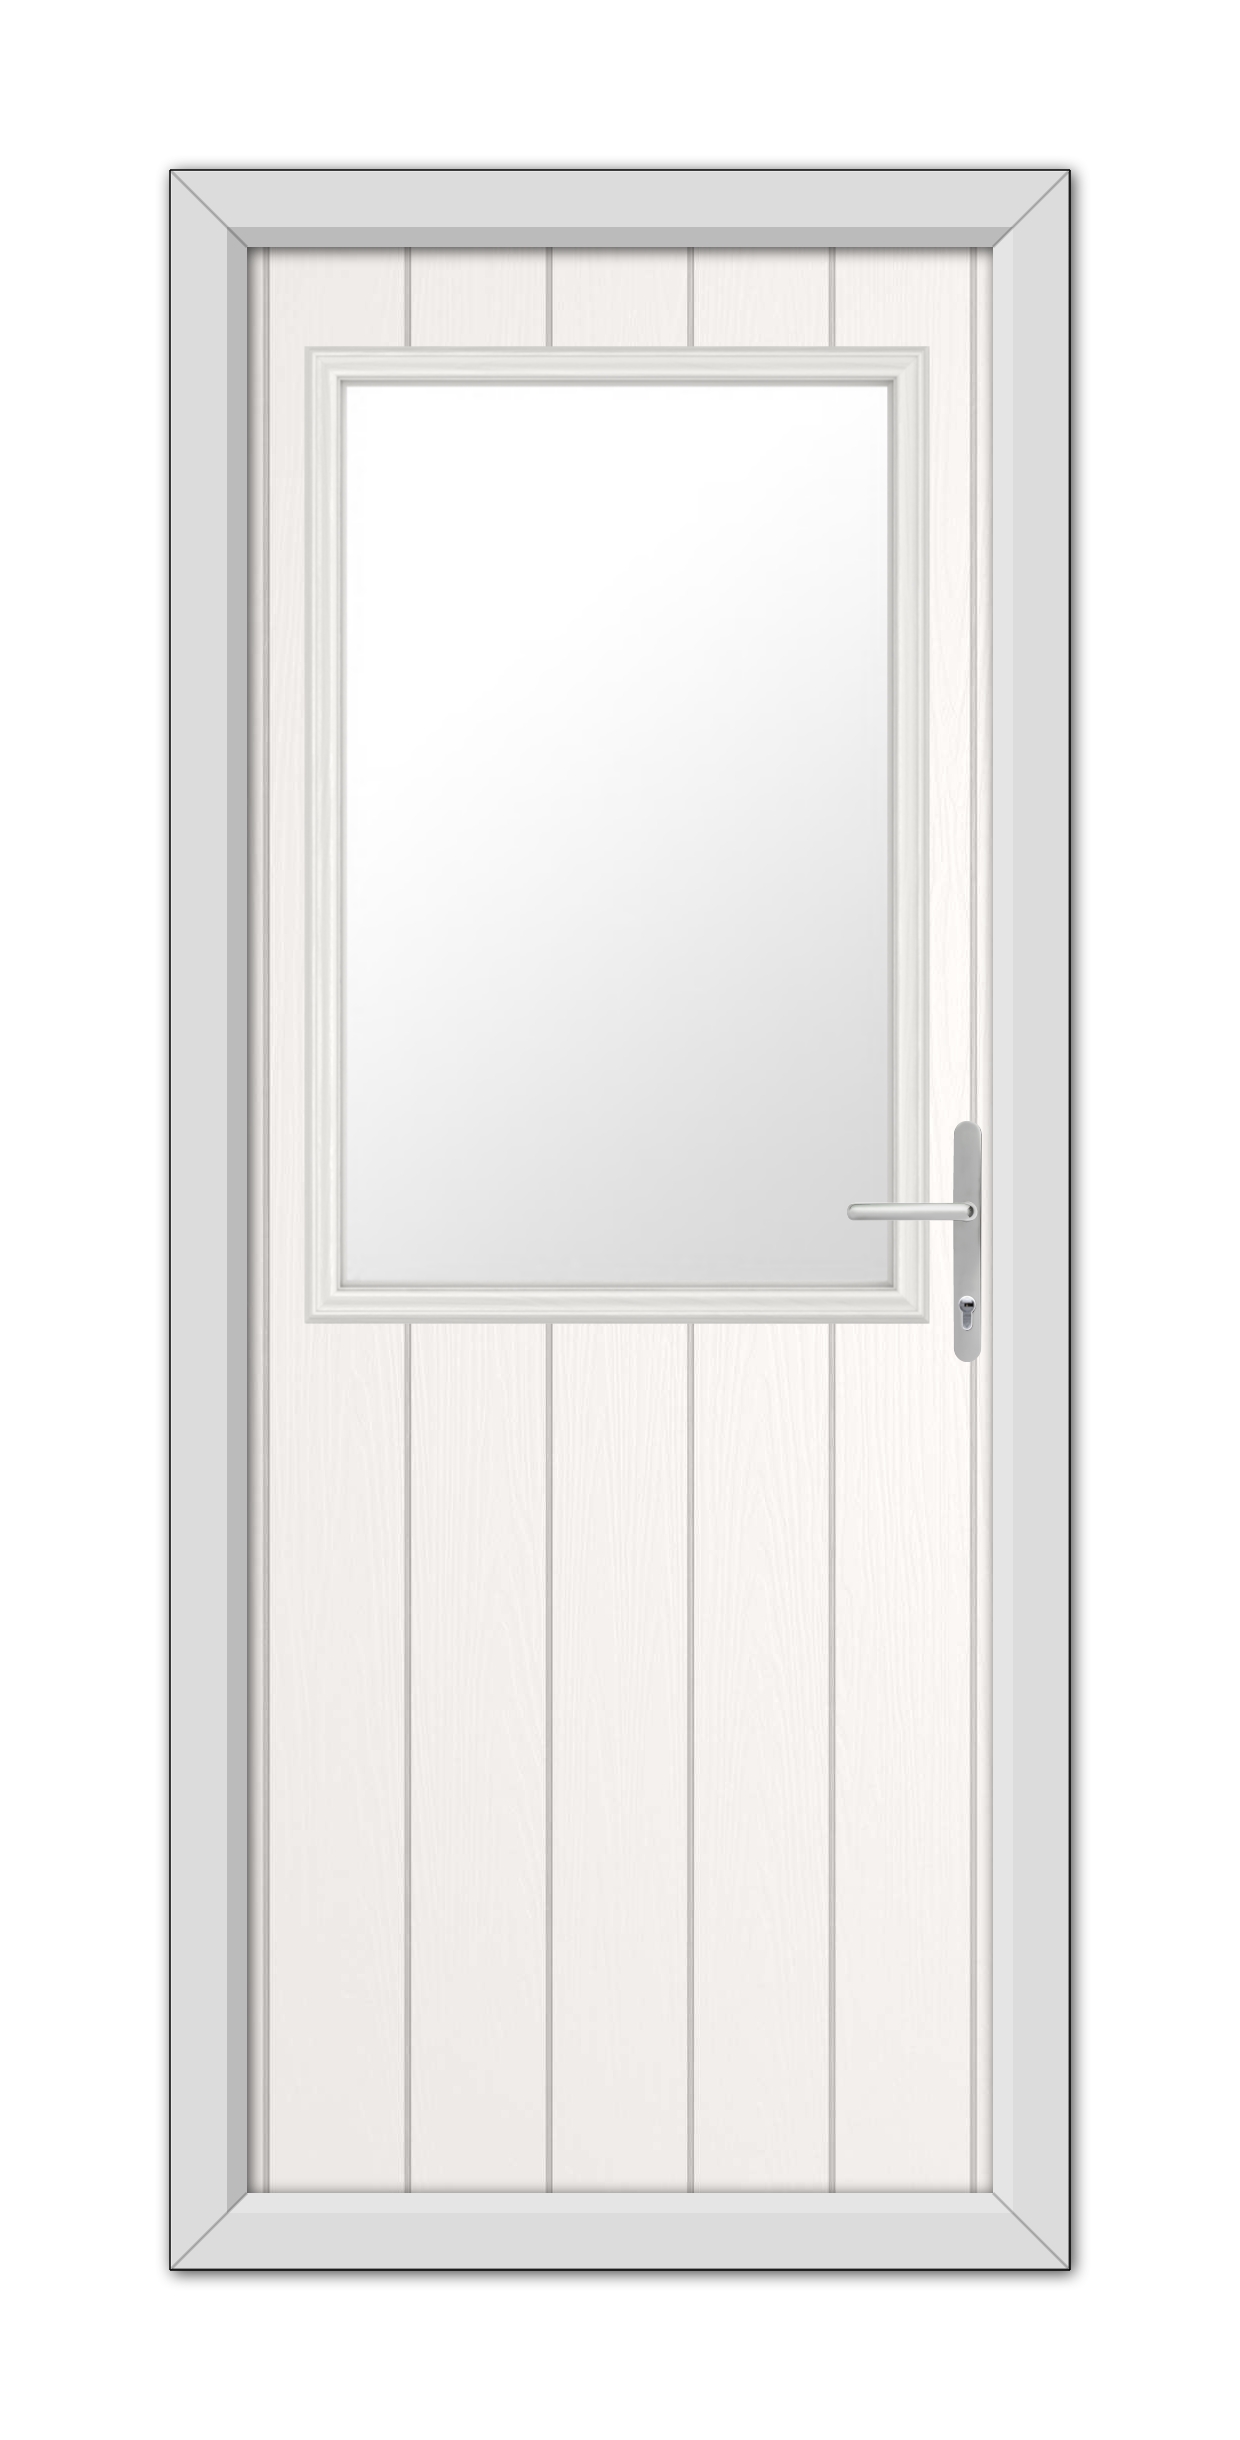 A White Clifton Composite Door 48mm Timber Core with a rectangular mirror in the center, featuring a metal handle on the right side.